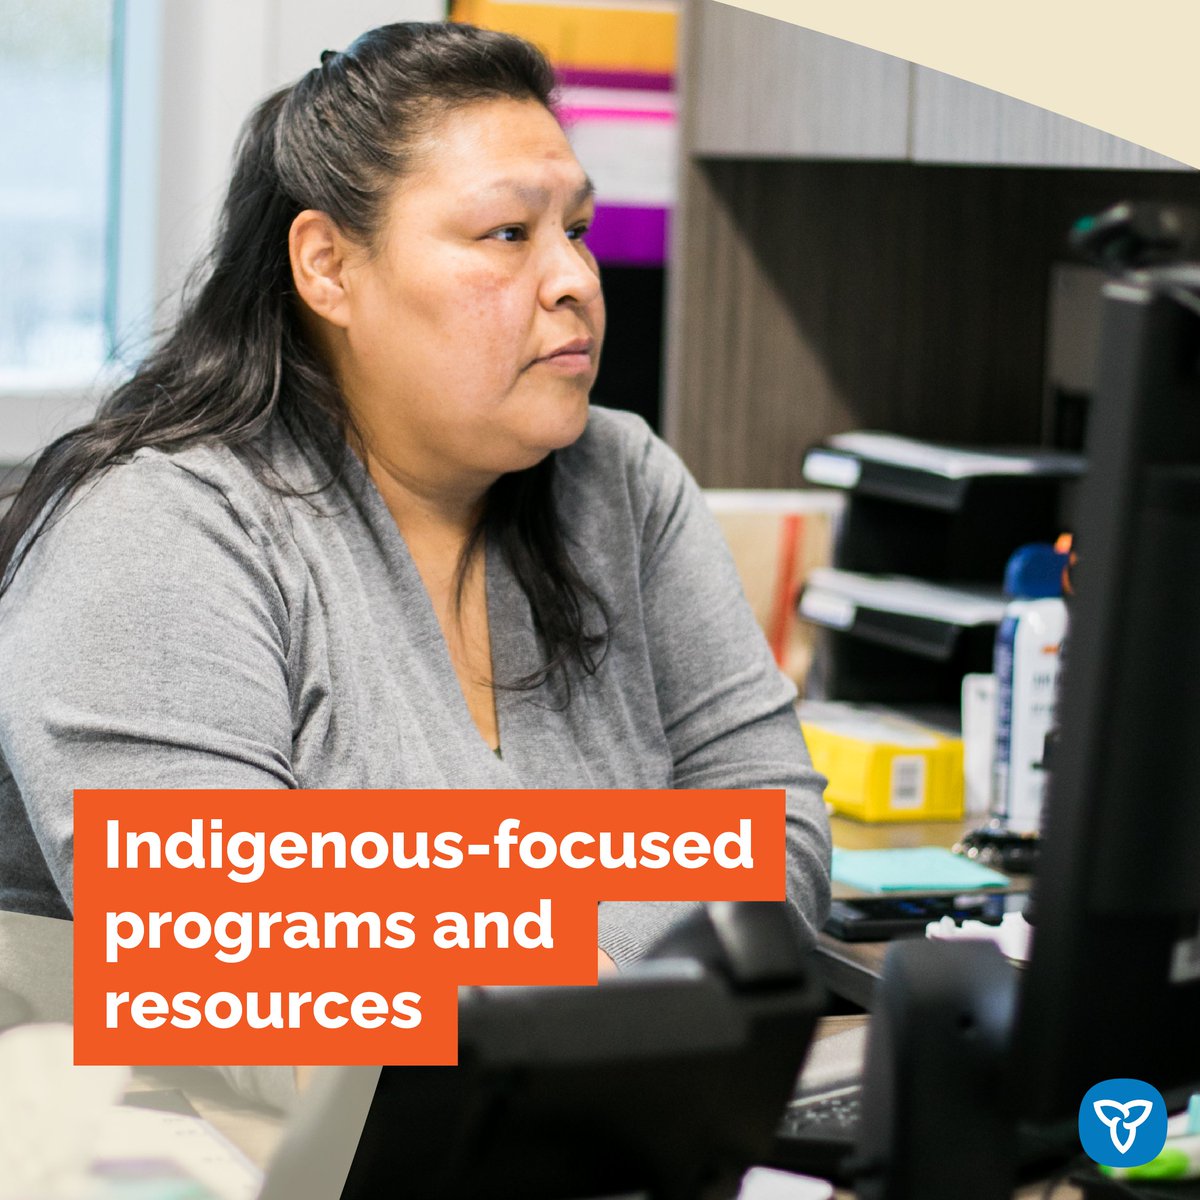 Ontario has resources for Indigenous youth, parents, caregivers, and service providers to help prevent human trafficking. Learn more about Indigenous-focused education programs and resources: ontario.ca/page/sex-traff…